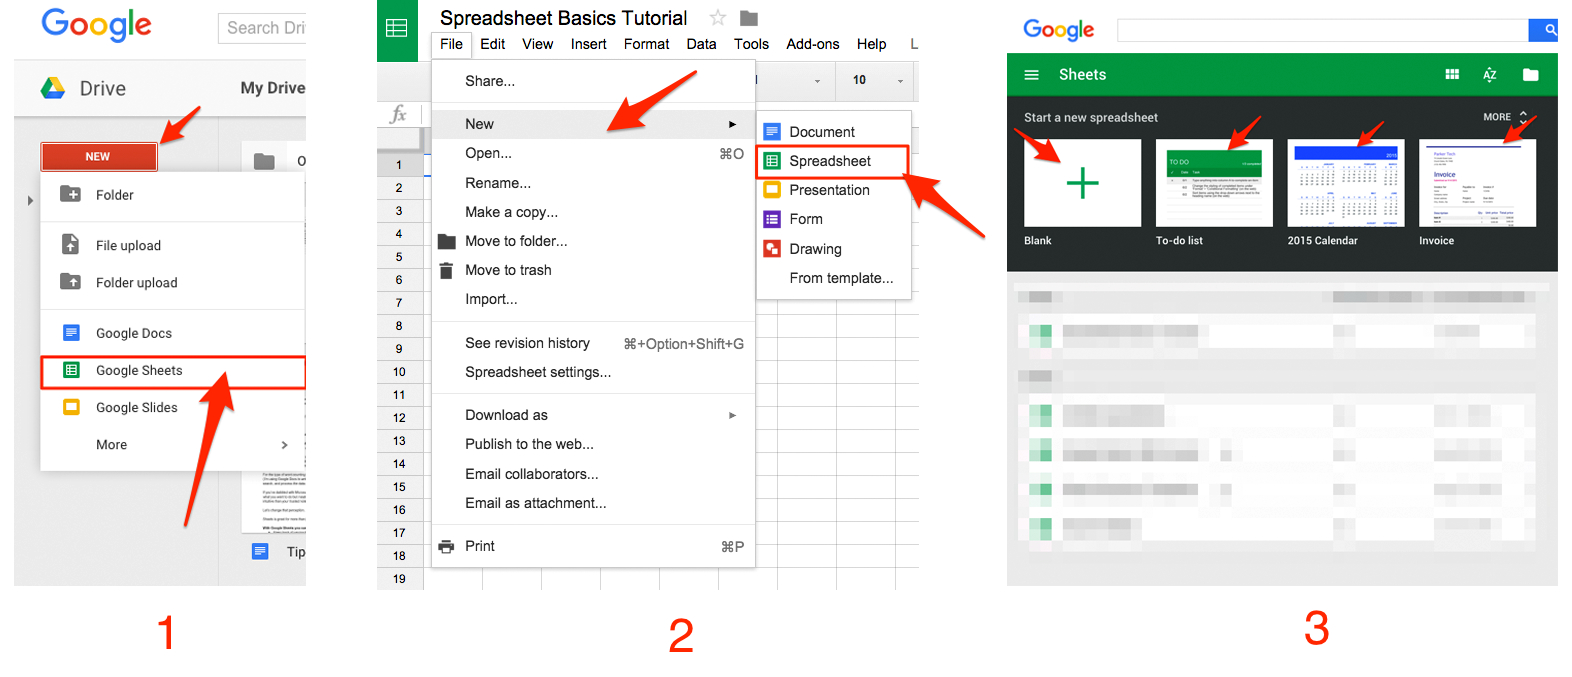 Building Spreadsheets With Google Sheets 101: The Beginner's Guide To Online Spreadsheets  The